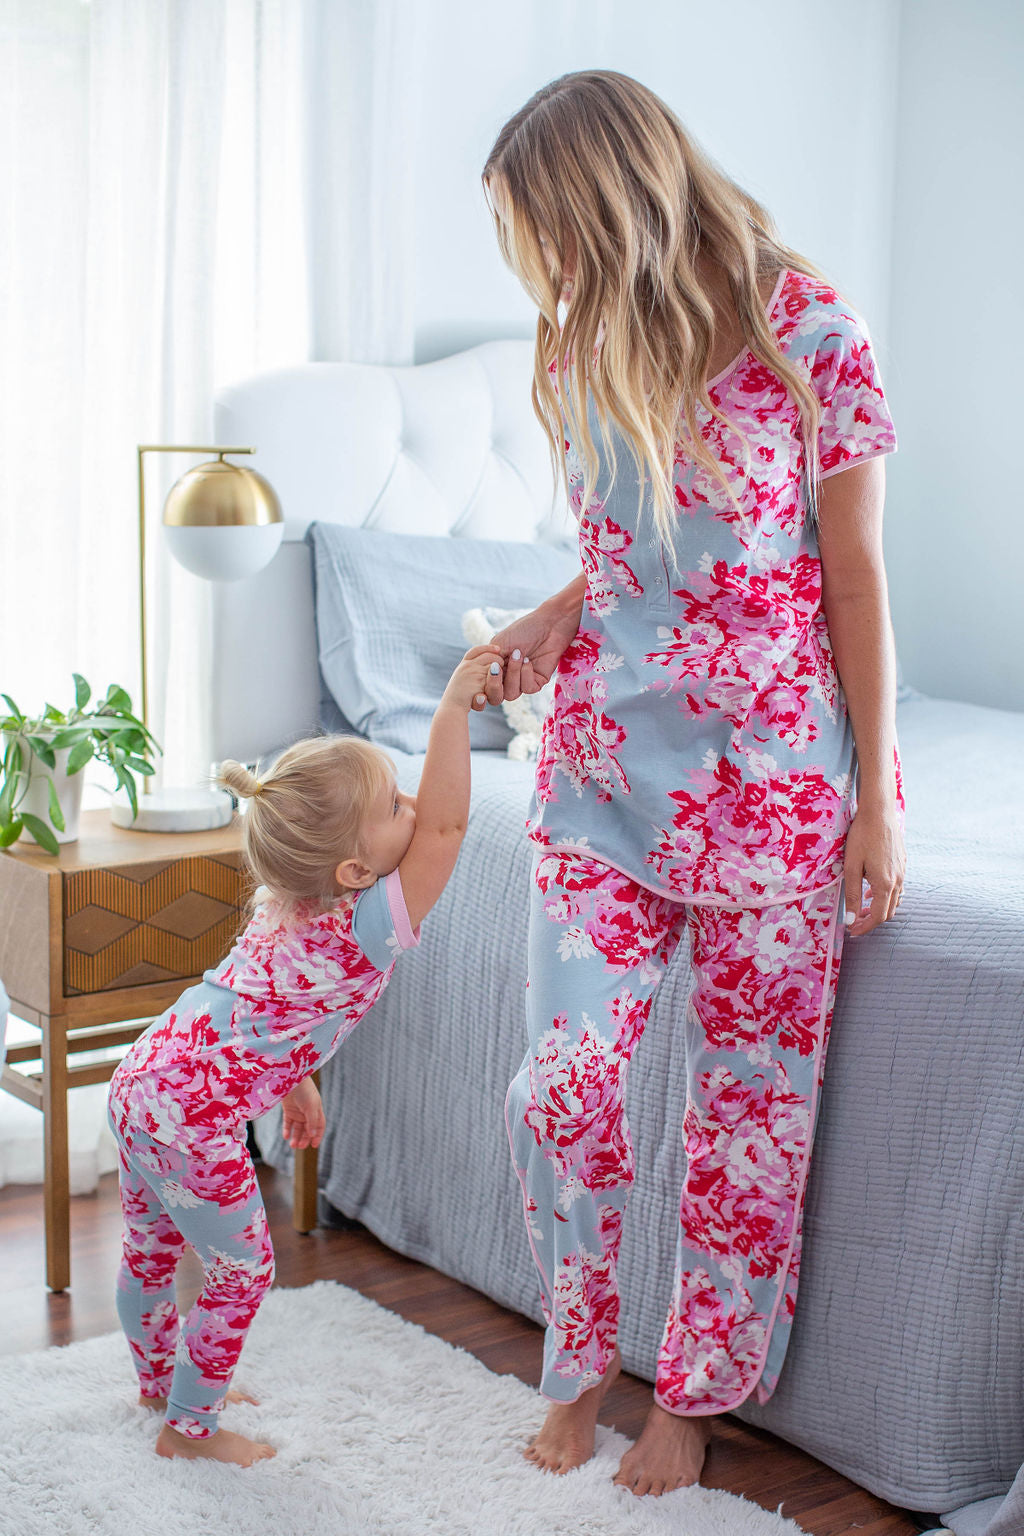 Mommy and Me Couples Pajamas 20 Colours Matching Family Pyjamas Lounge Set,  , Cute Loungewear, Sweatsuit, Matching Set, Pjs for Bridesmaid 